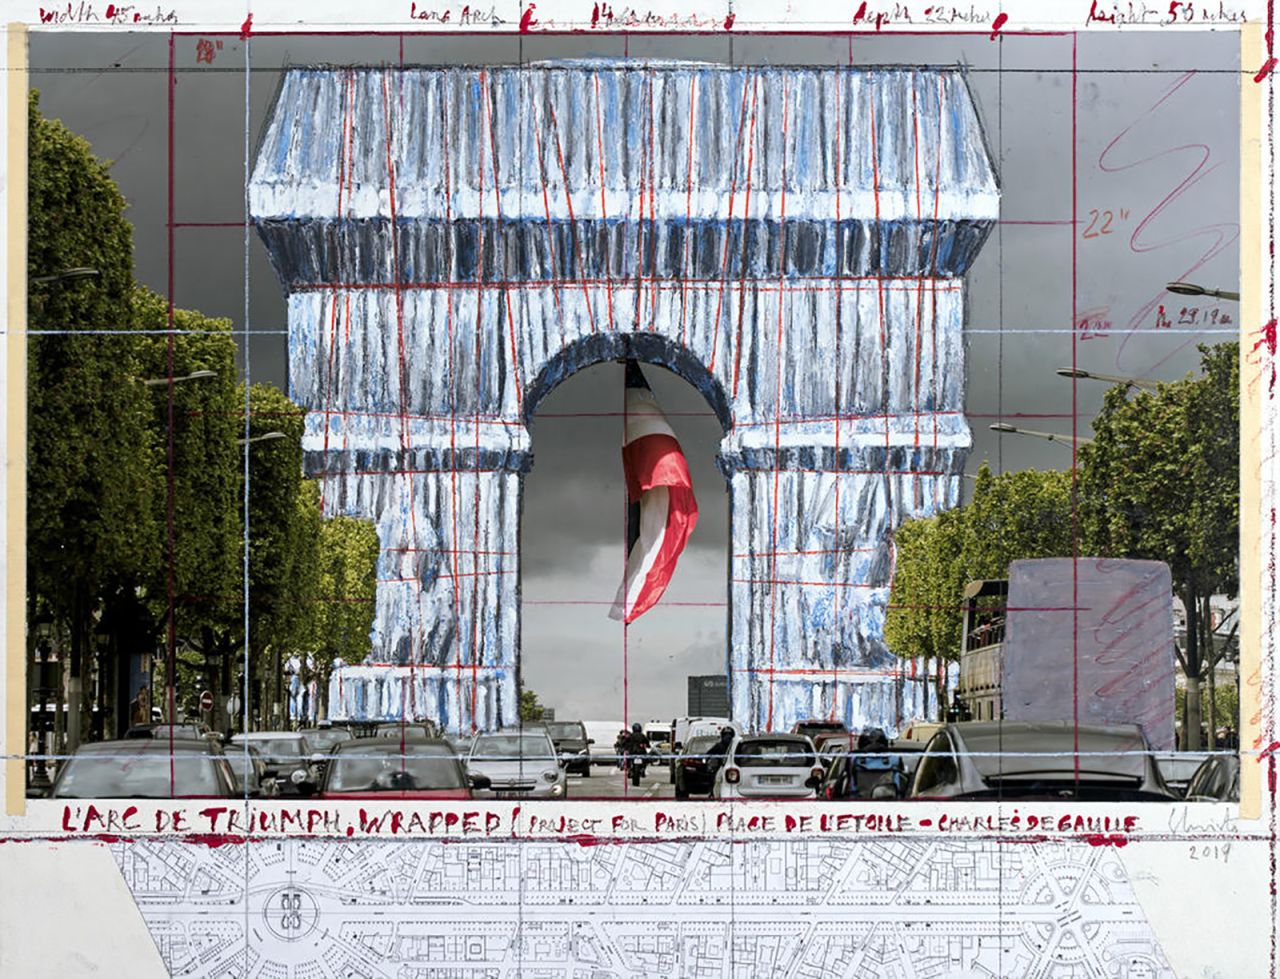 A rendering of the 2021 project. The artists envisioned wrapping L'Arc de Triomphe.